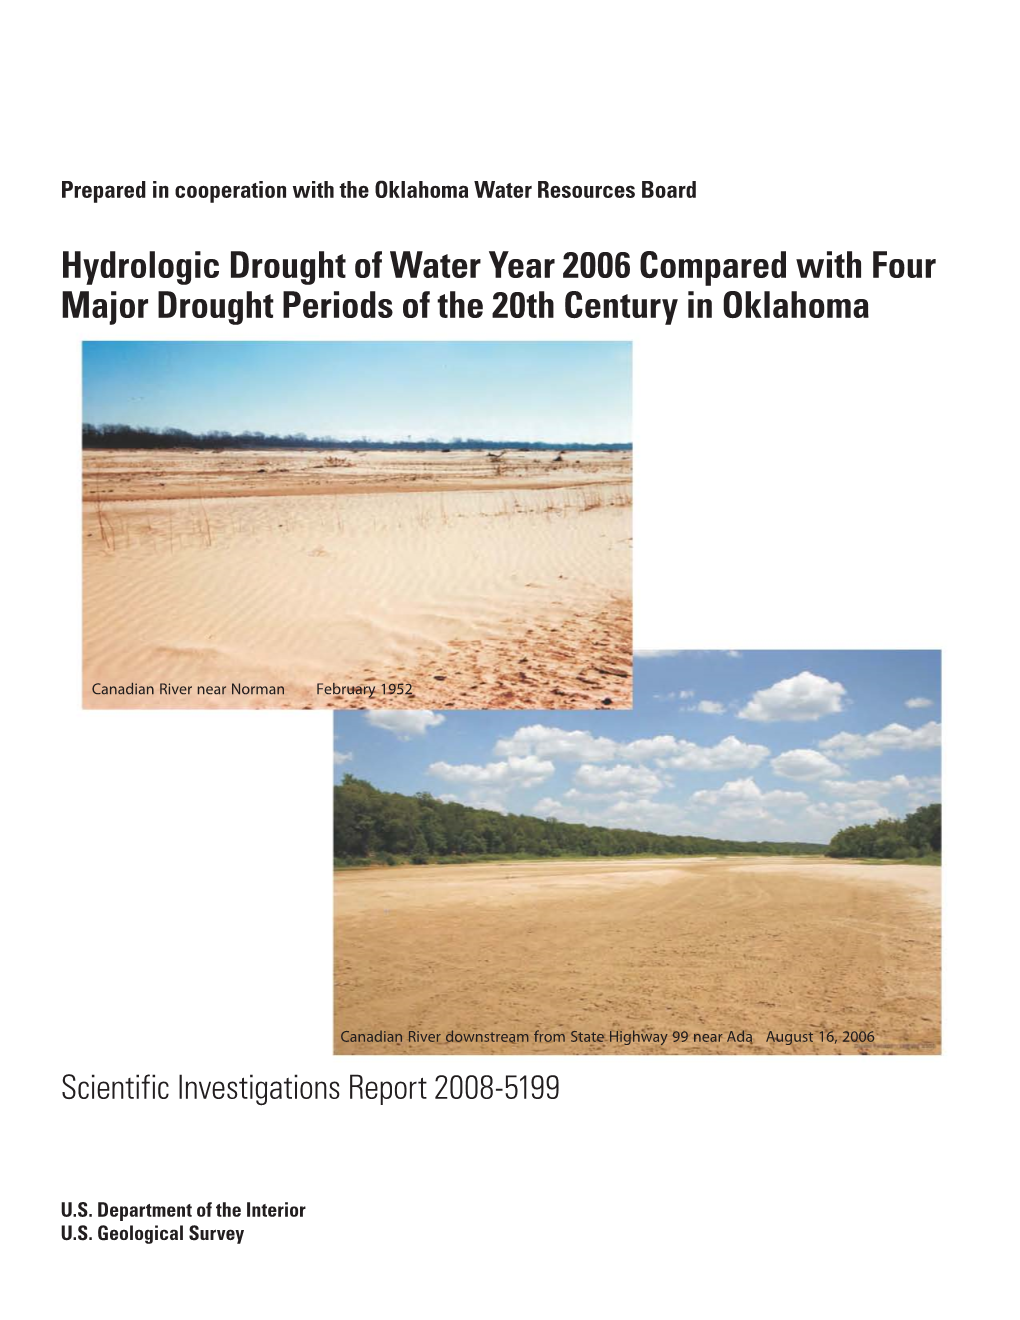 Drought of Water Year 2006 Compared with Four Major Drought Periods of the 20Th Century in Oklahoma